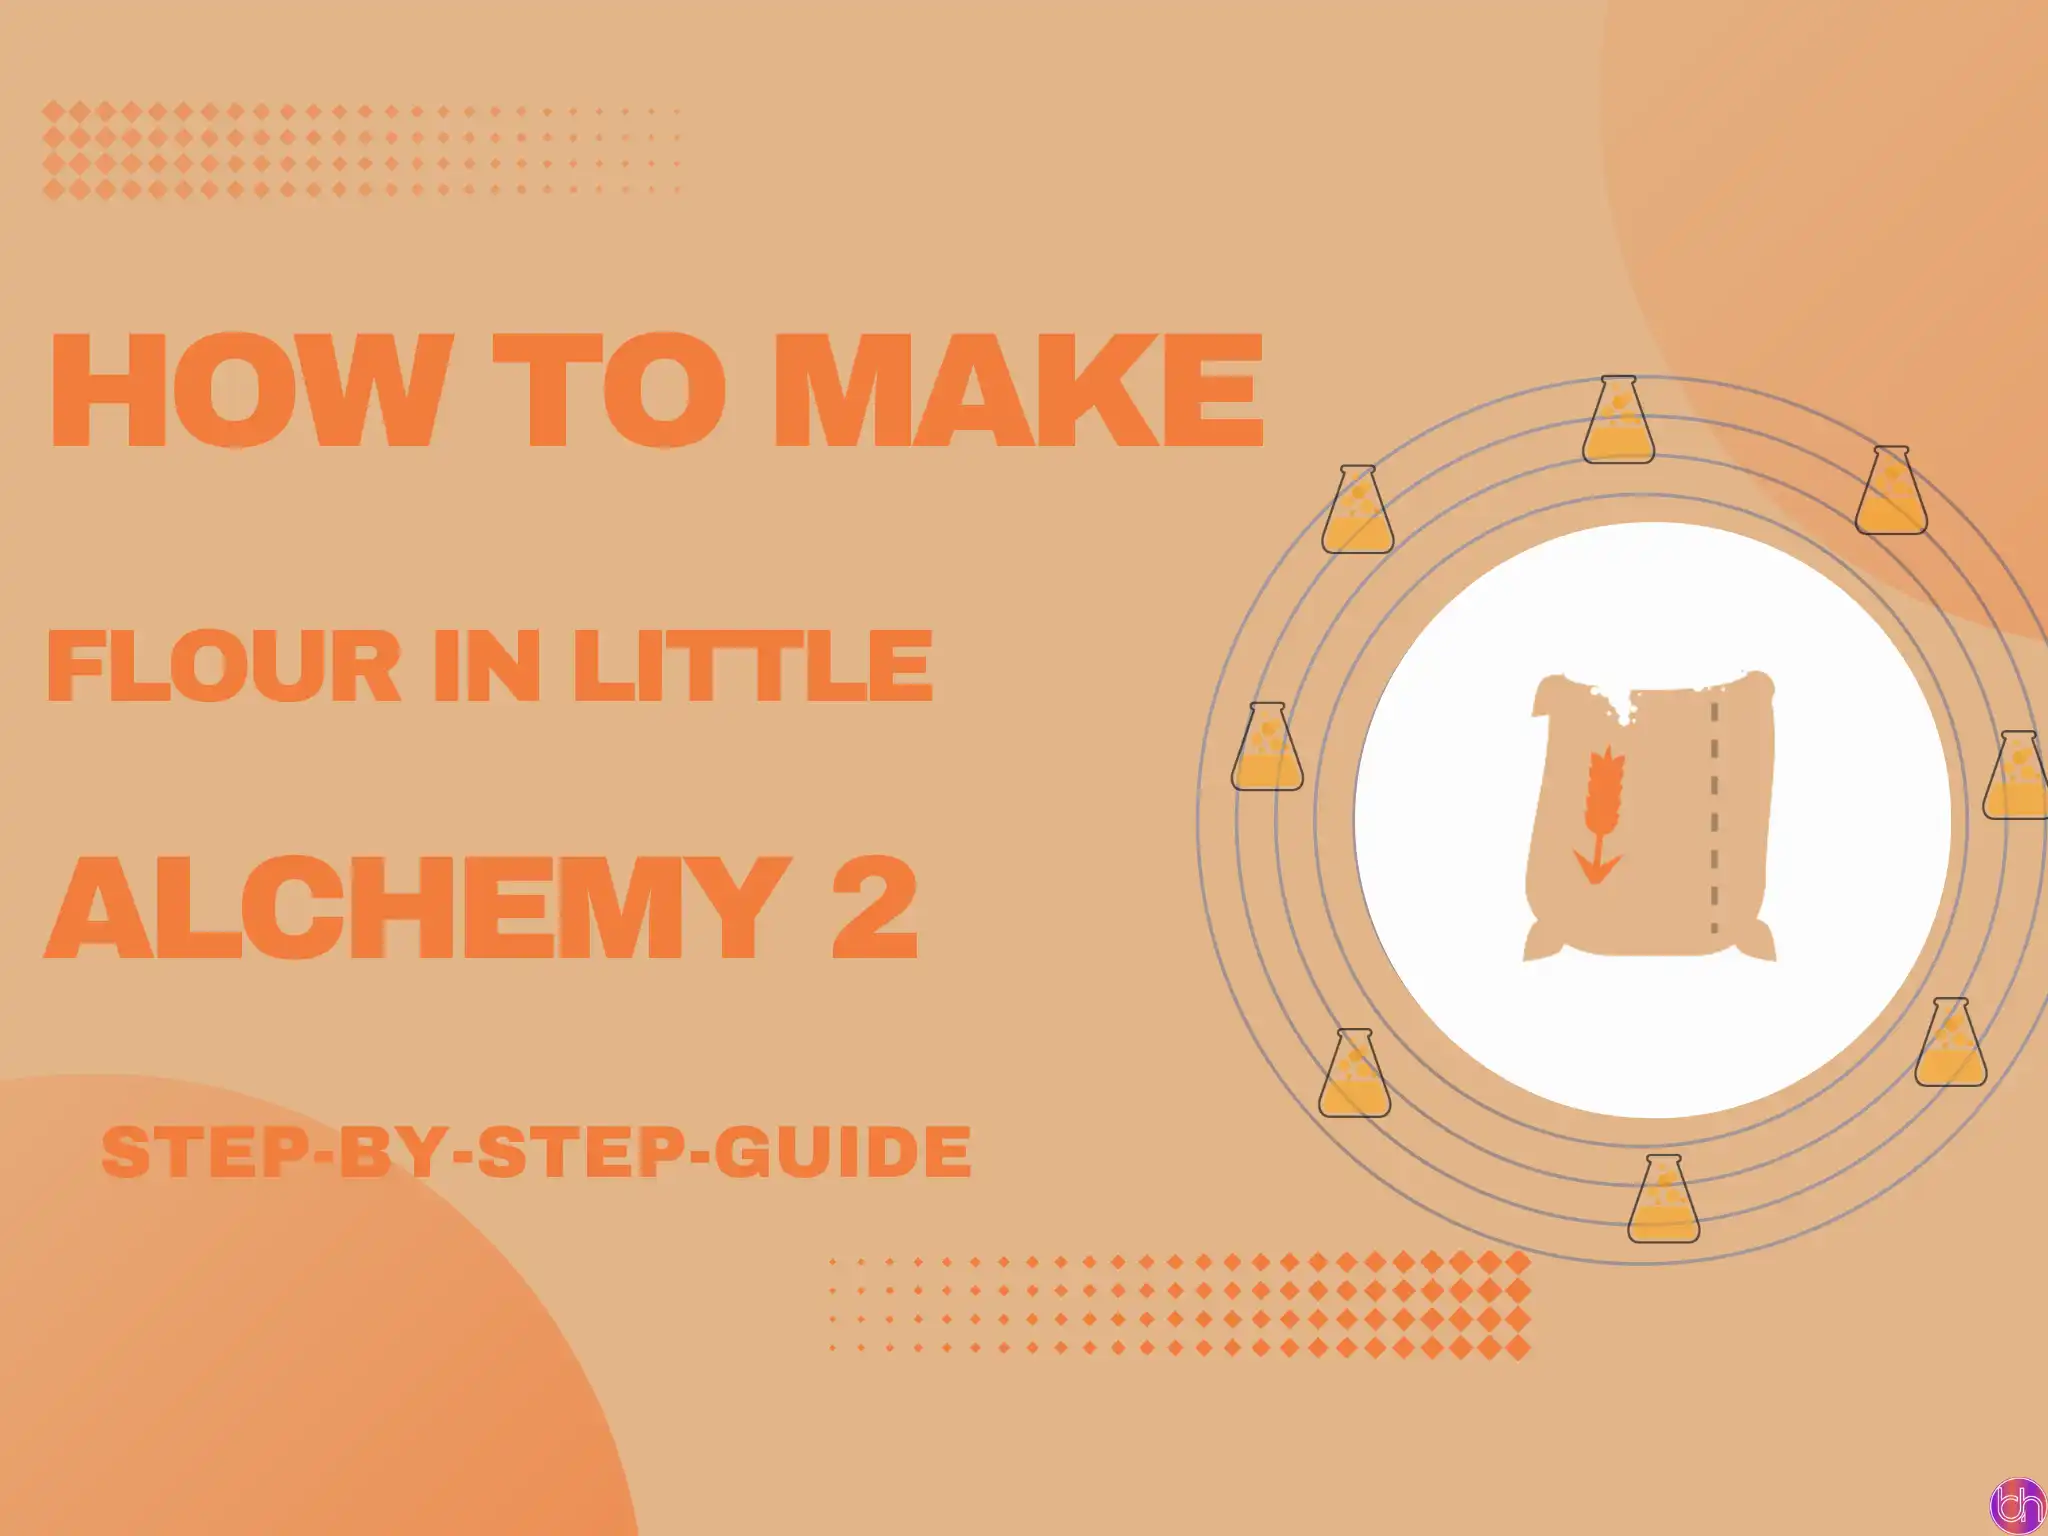 How to Make Flour in Little Alchemy 2